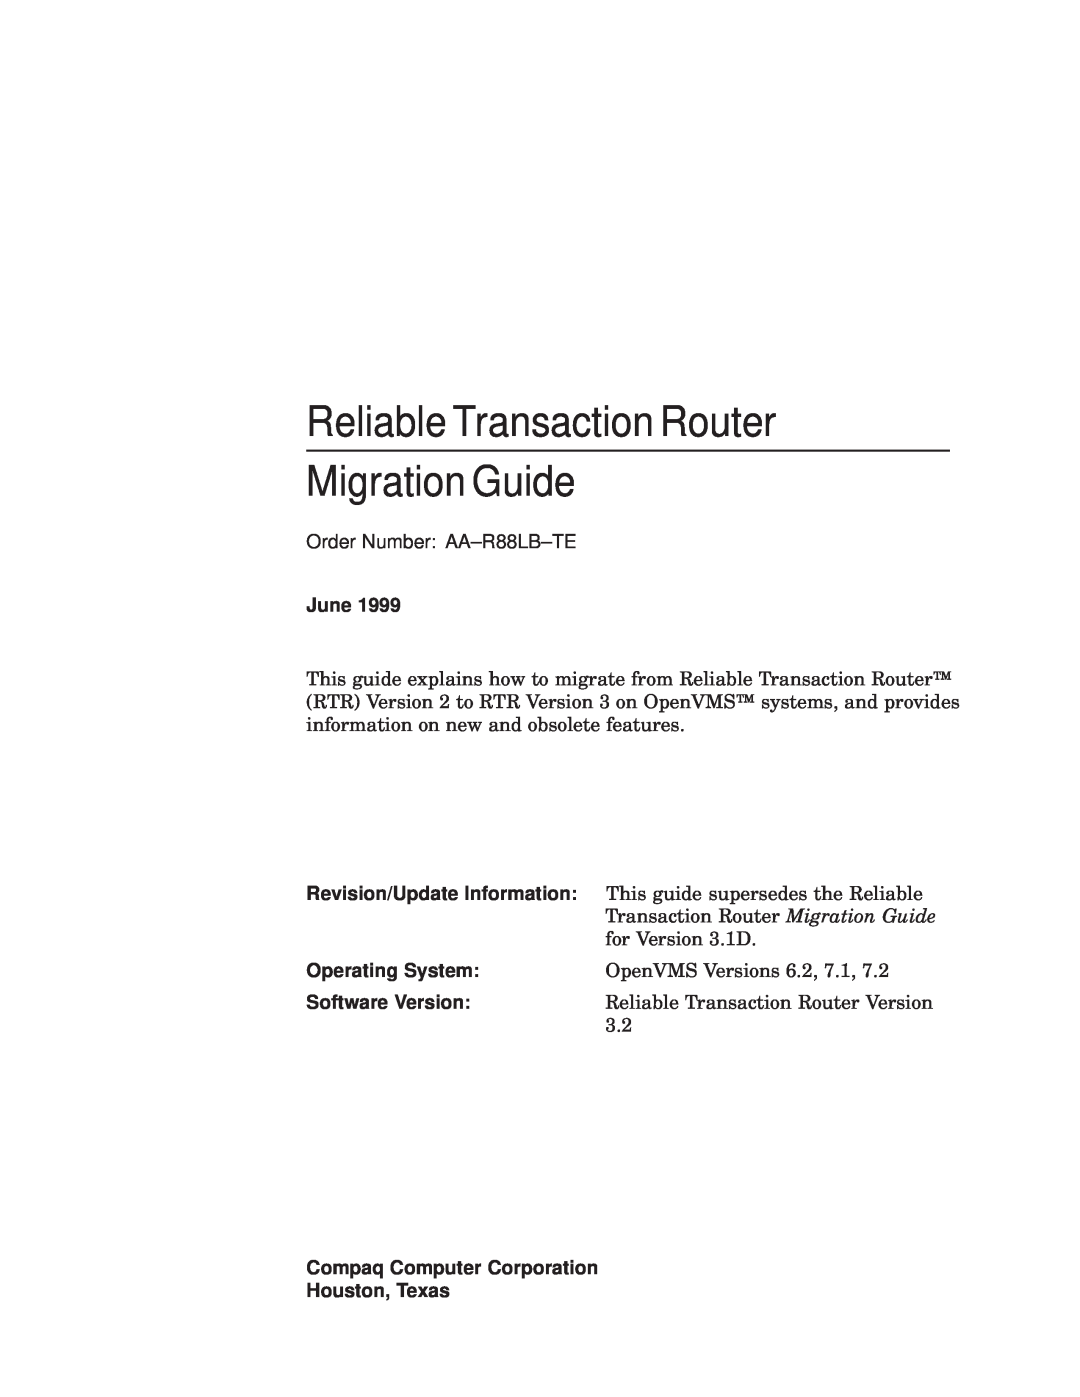 Compaq AAR-88LB-TE manual Reliable Transaction Router Migration Guide, June, Operating System 